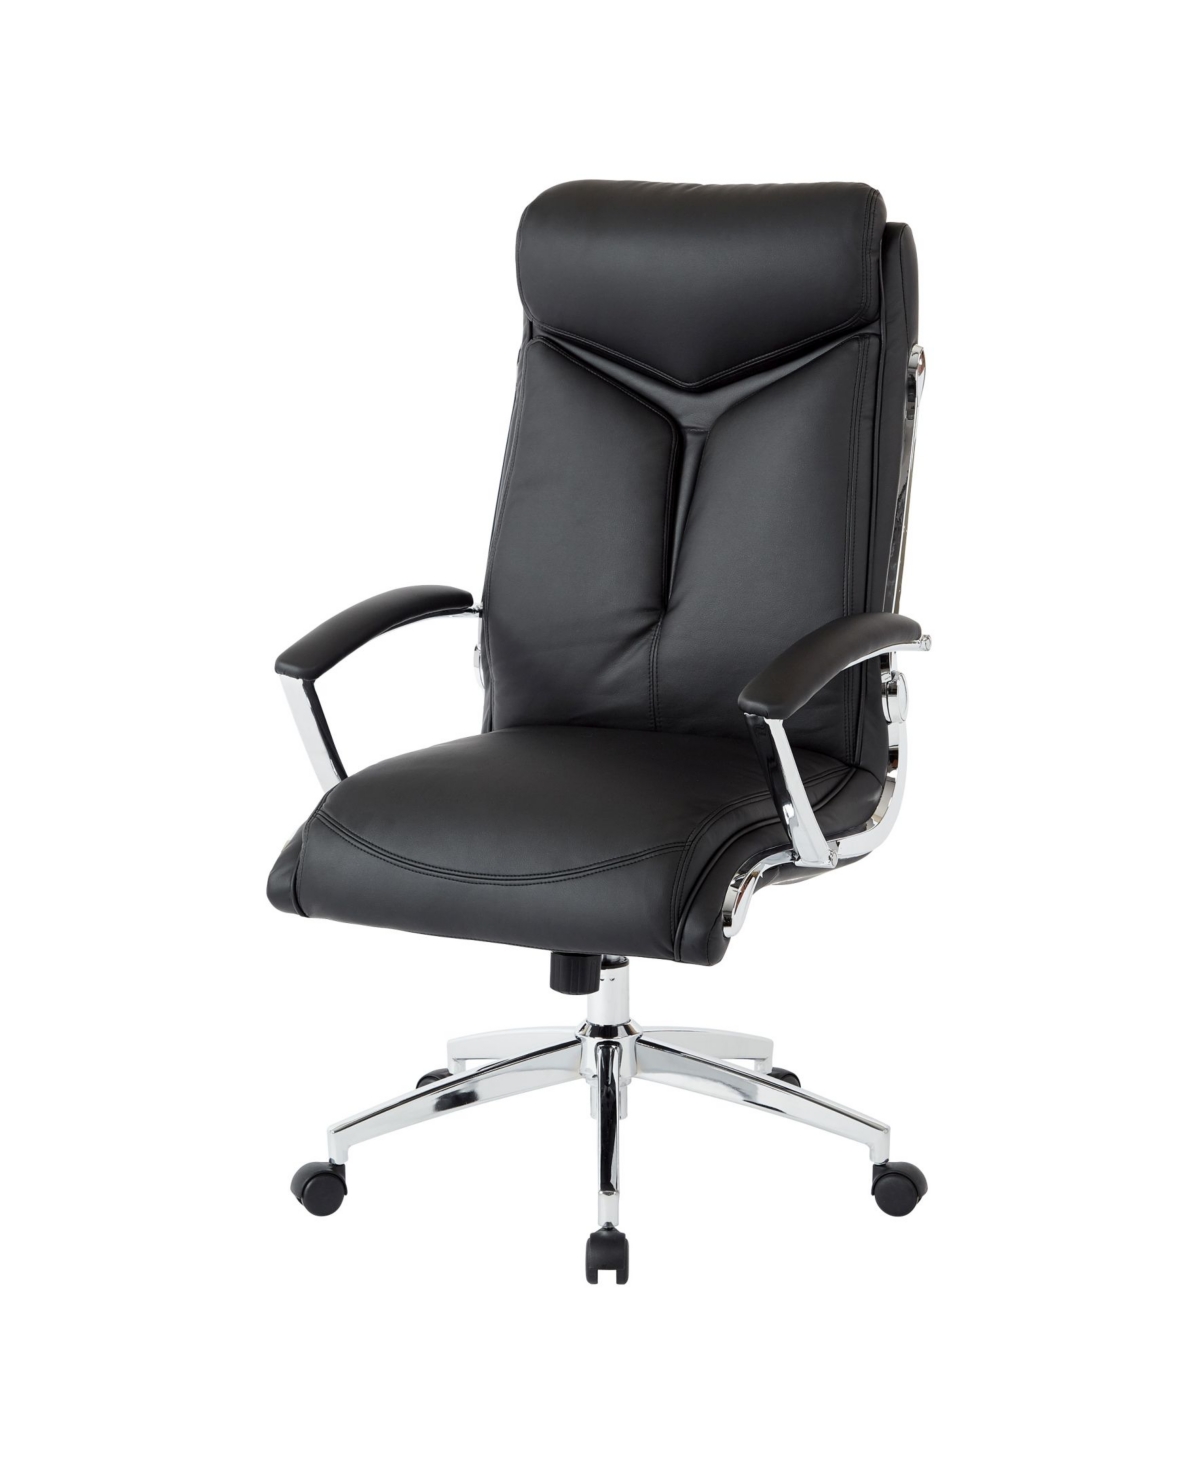 Osp Home Furnishings Executive High Back Office Chair